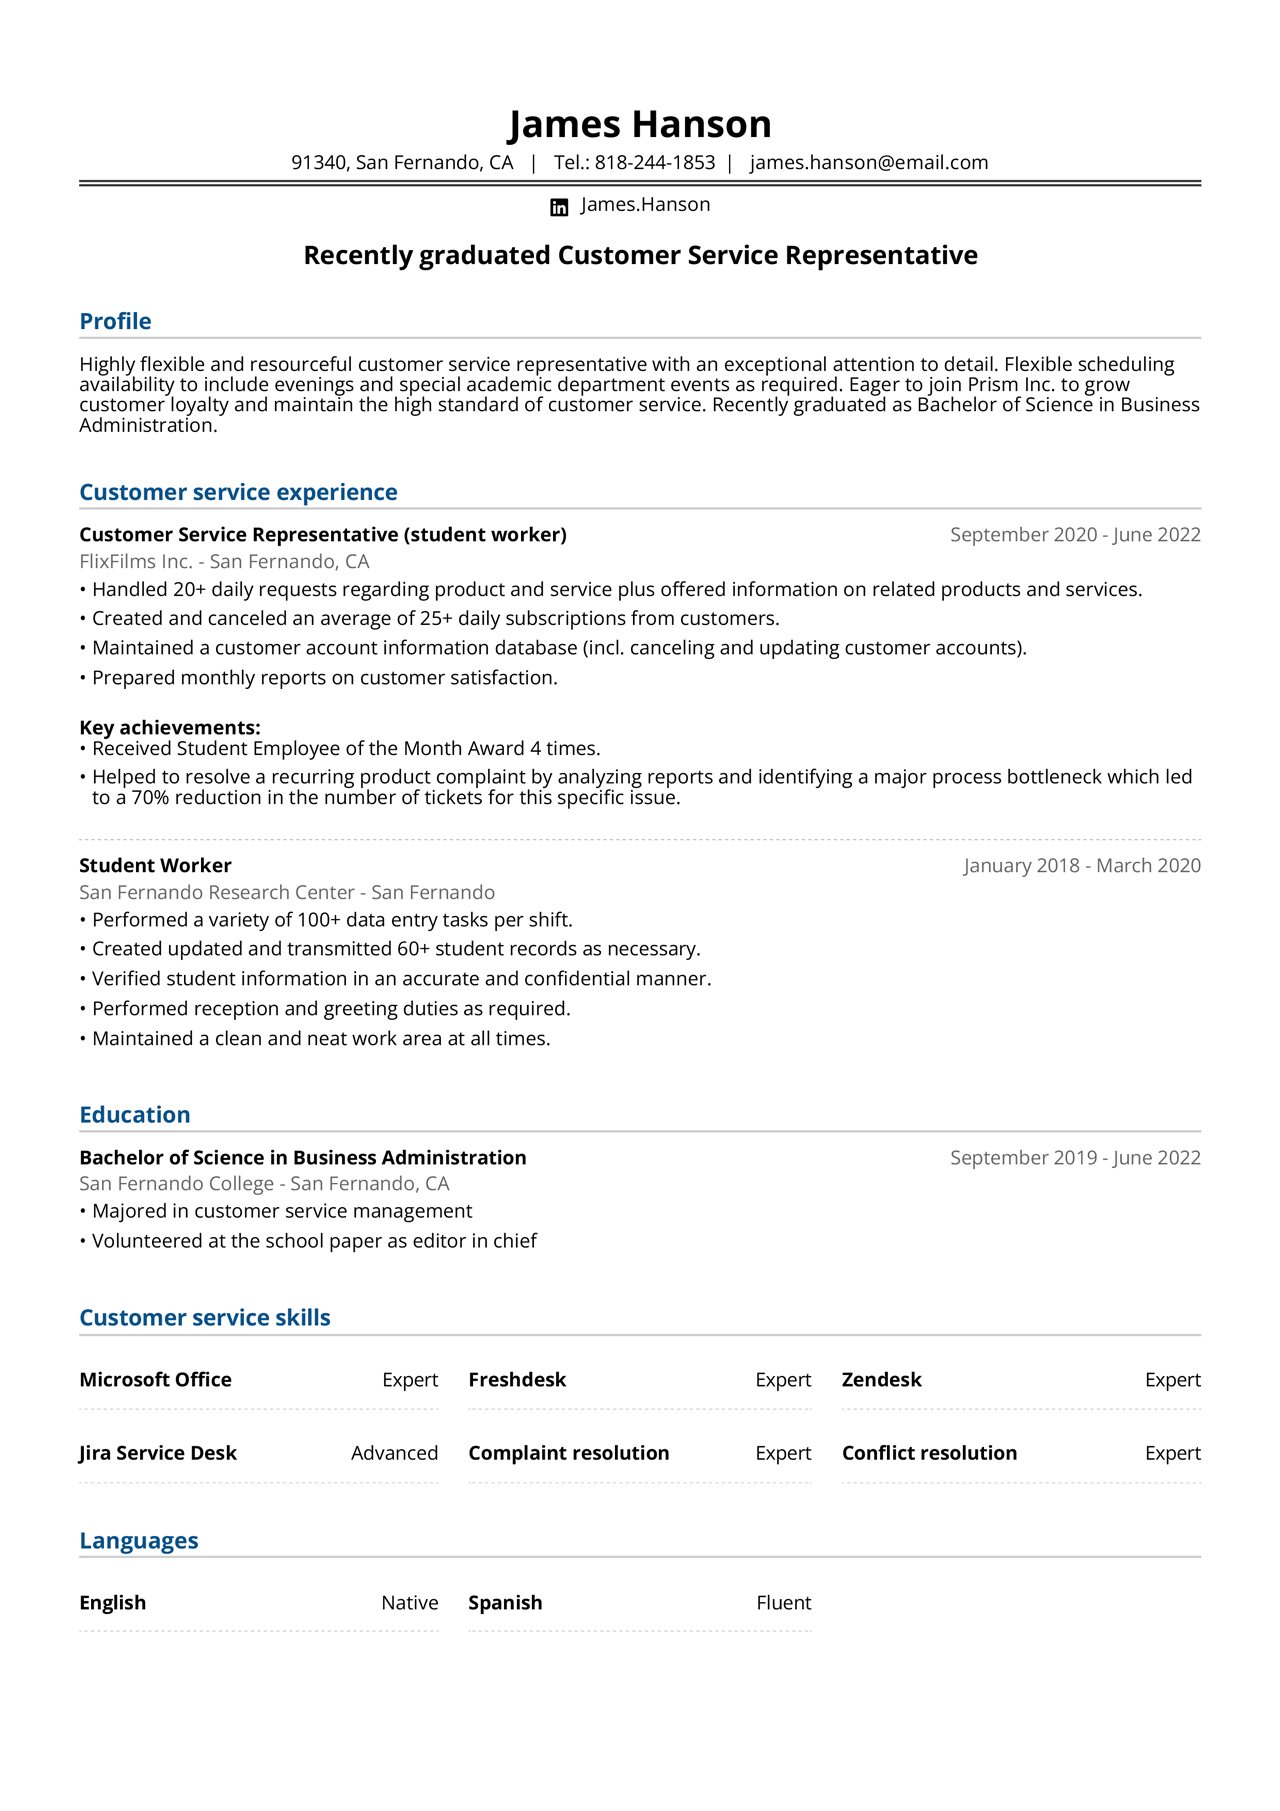 A finished entrylevel customer service resume example